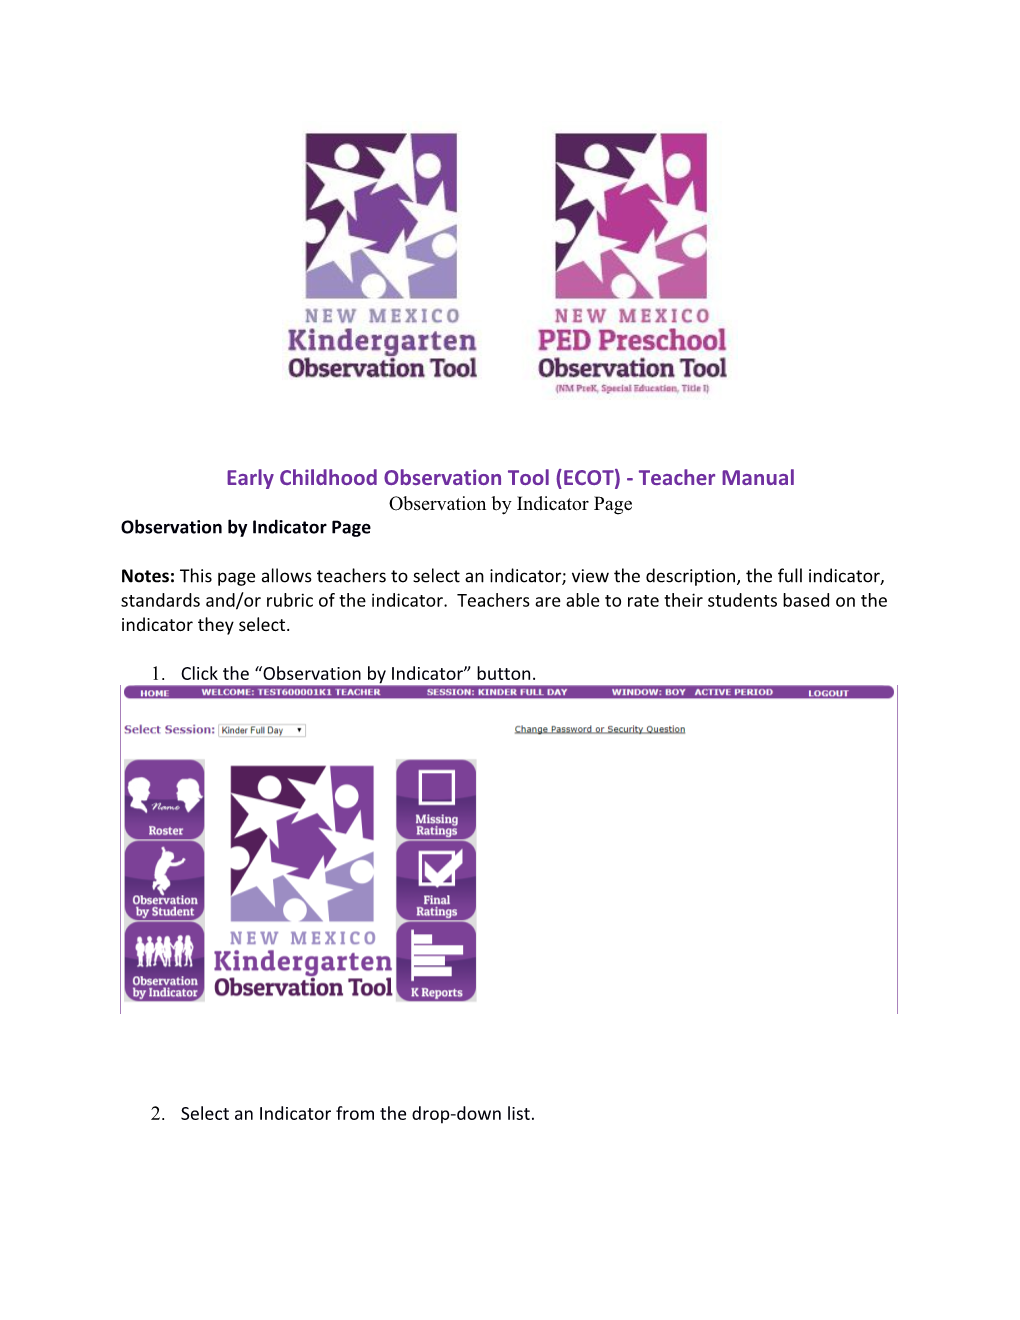 Early Childhood Observation Tool (ECOT) - Teacher Manual